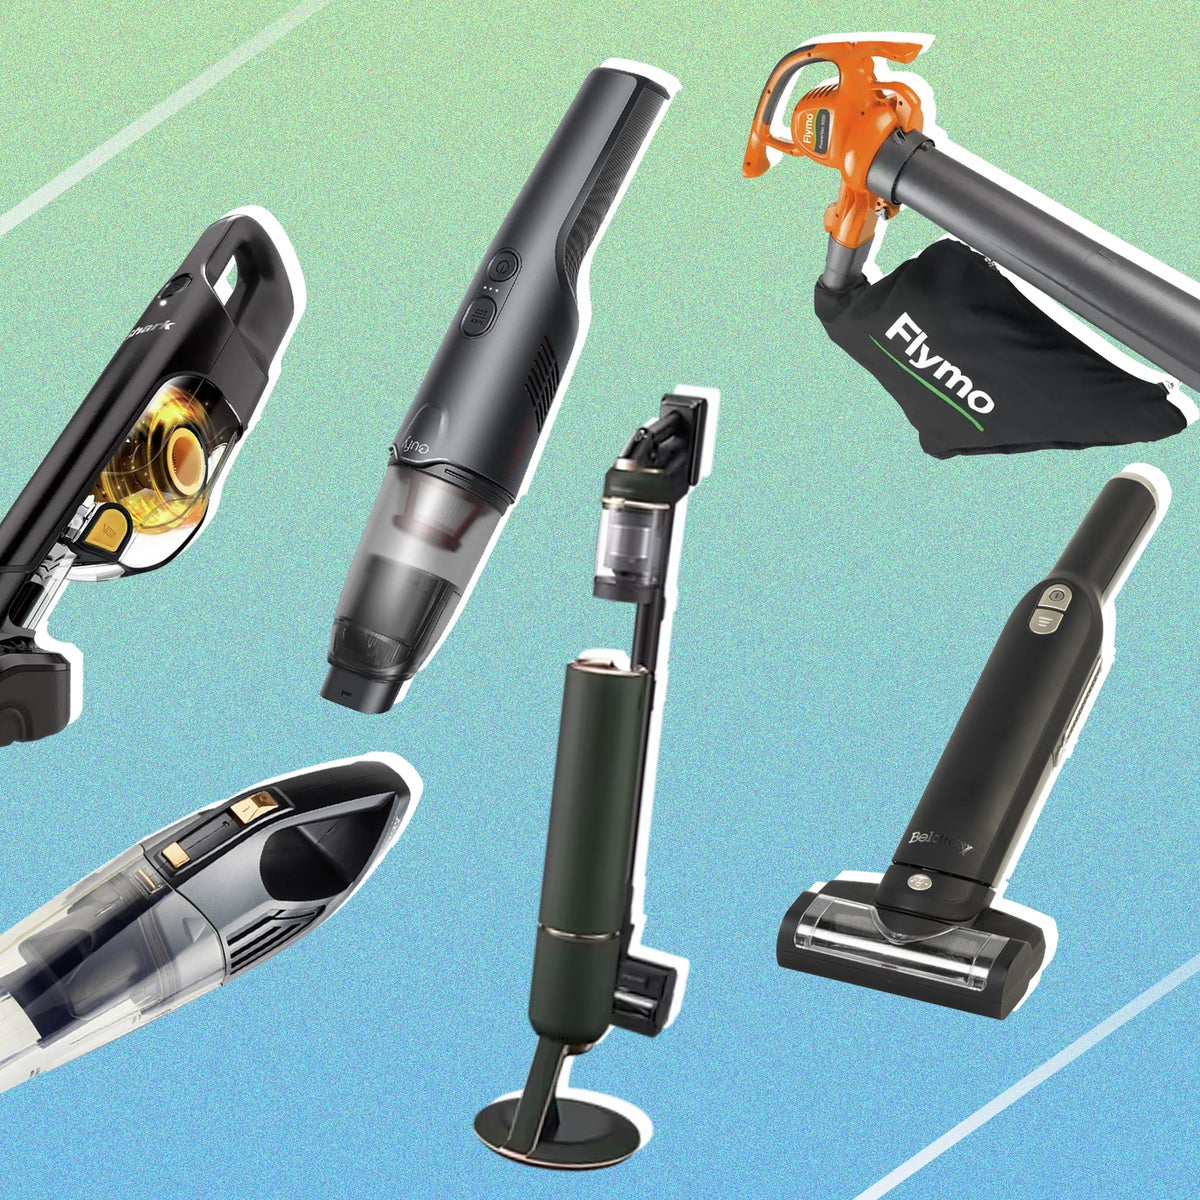 5 Best Portable Car Vacuums of 2023 - Reviewed